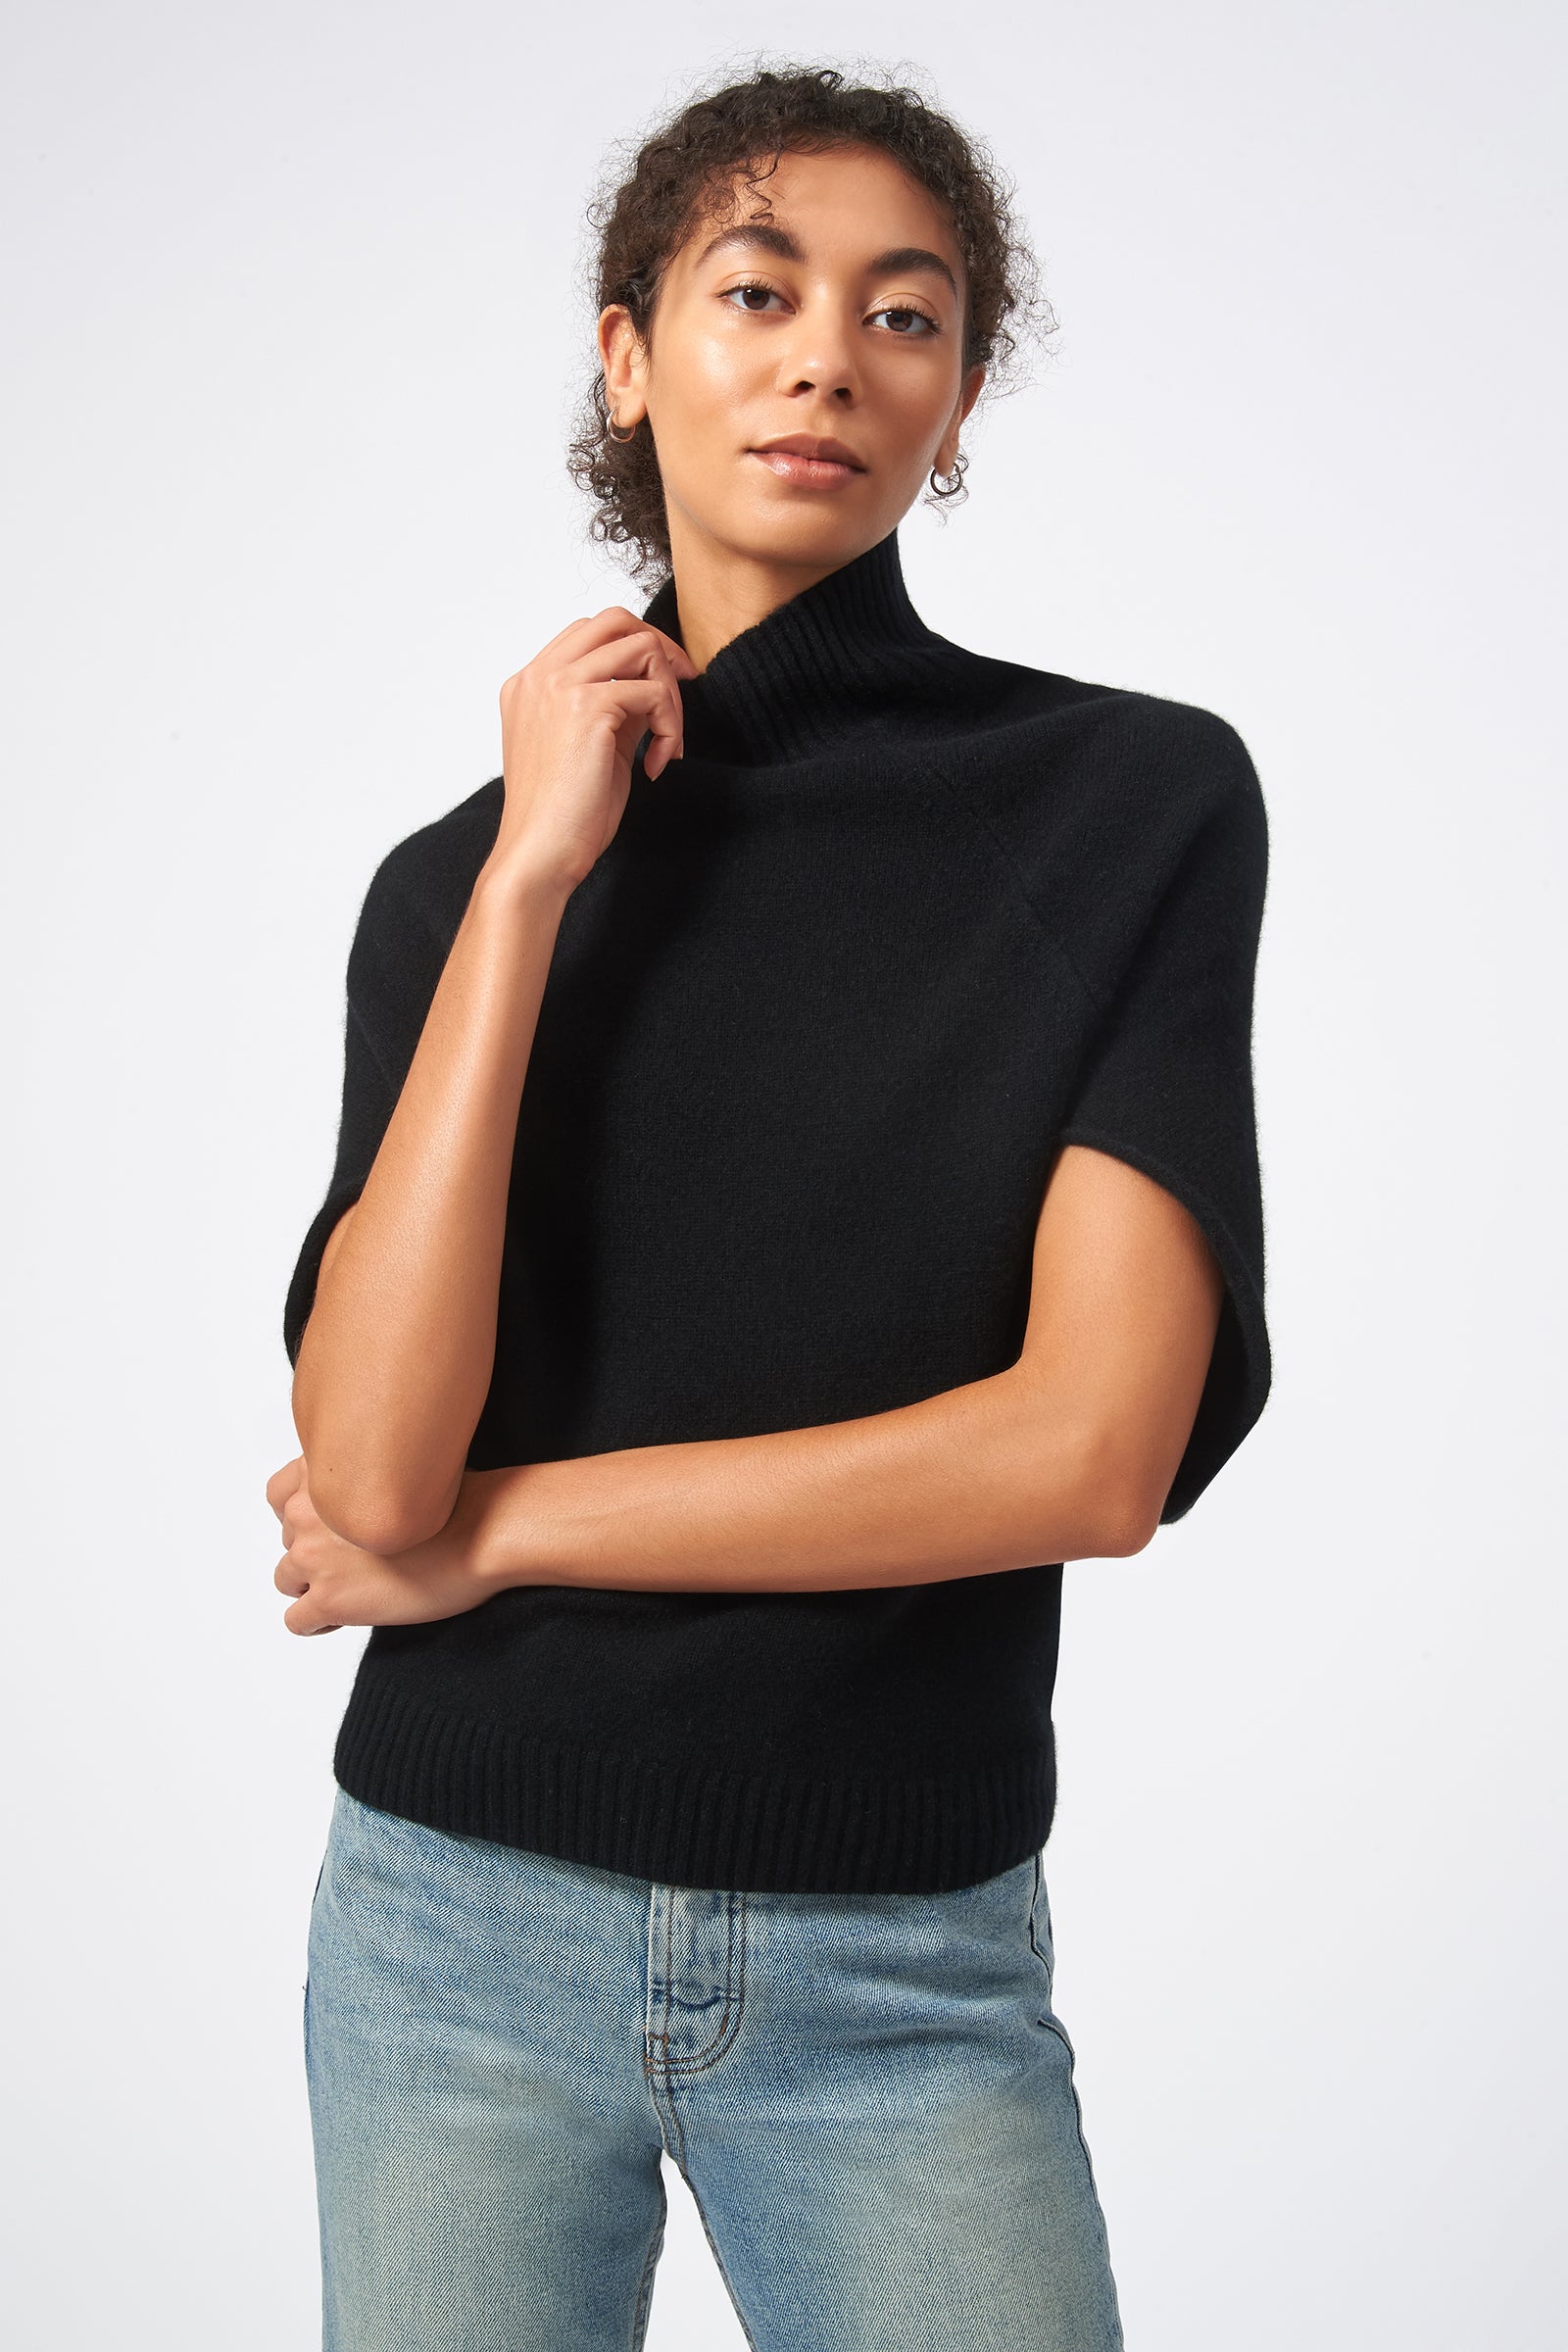 Kal Rieman Cashmere Cape Sweater in Black on Model Front View